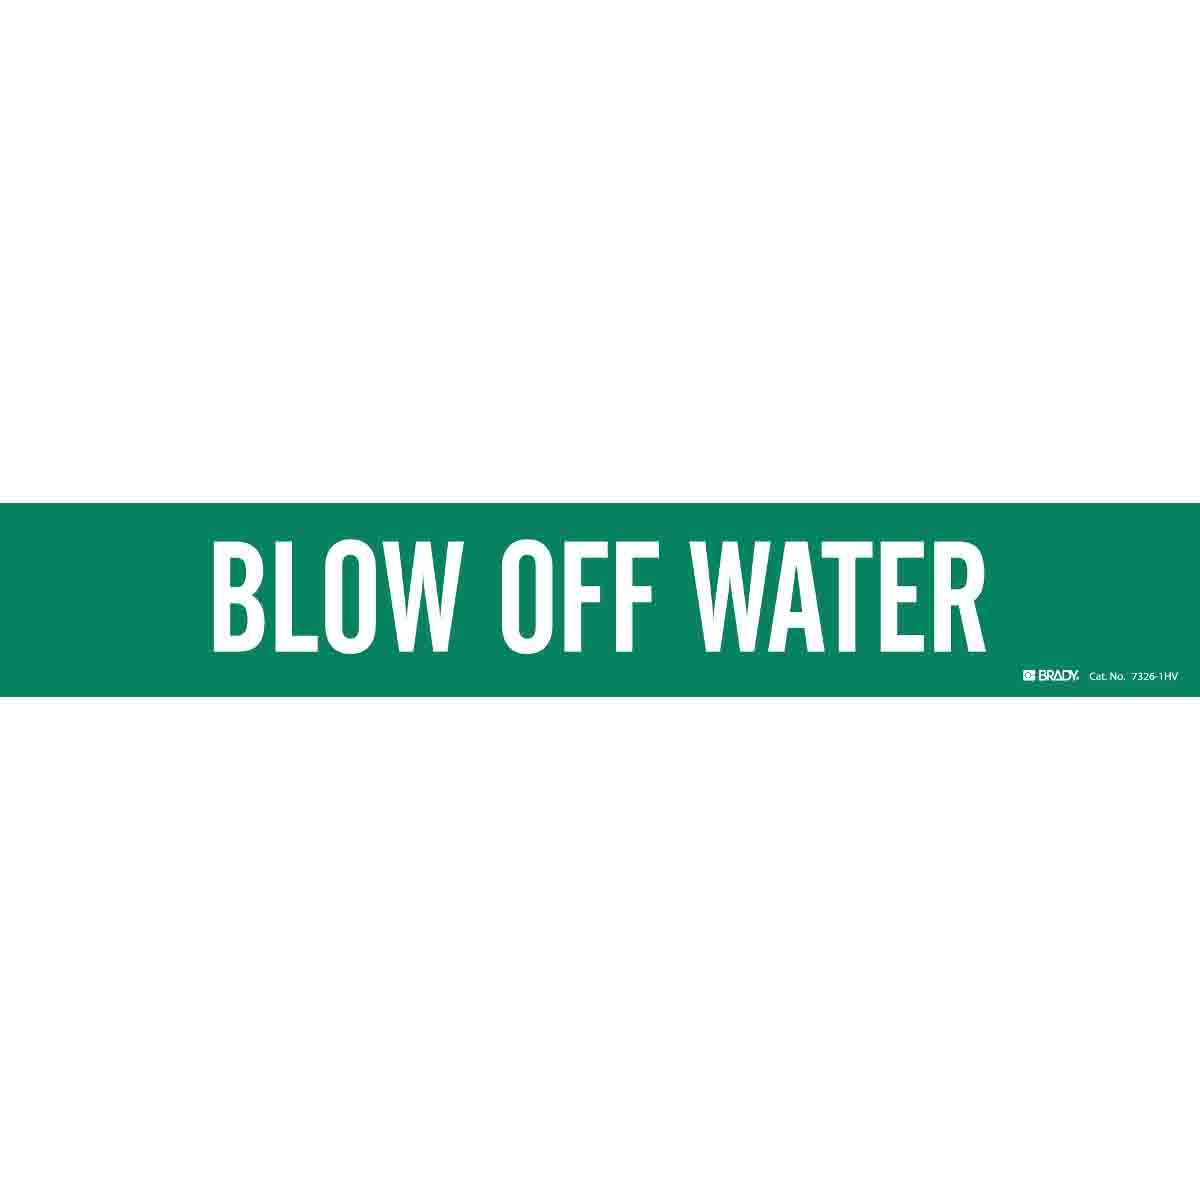 BLOW OFF WATER WHITE / GREEN